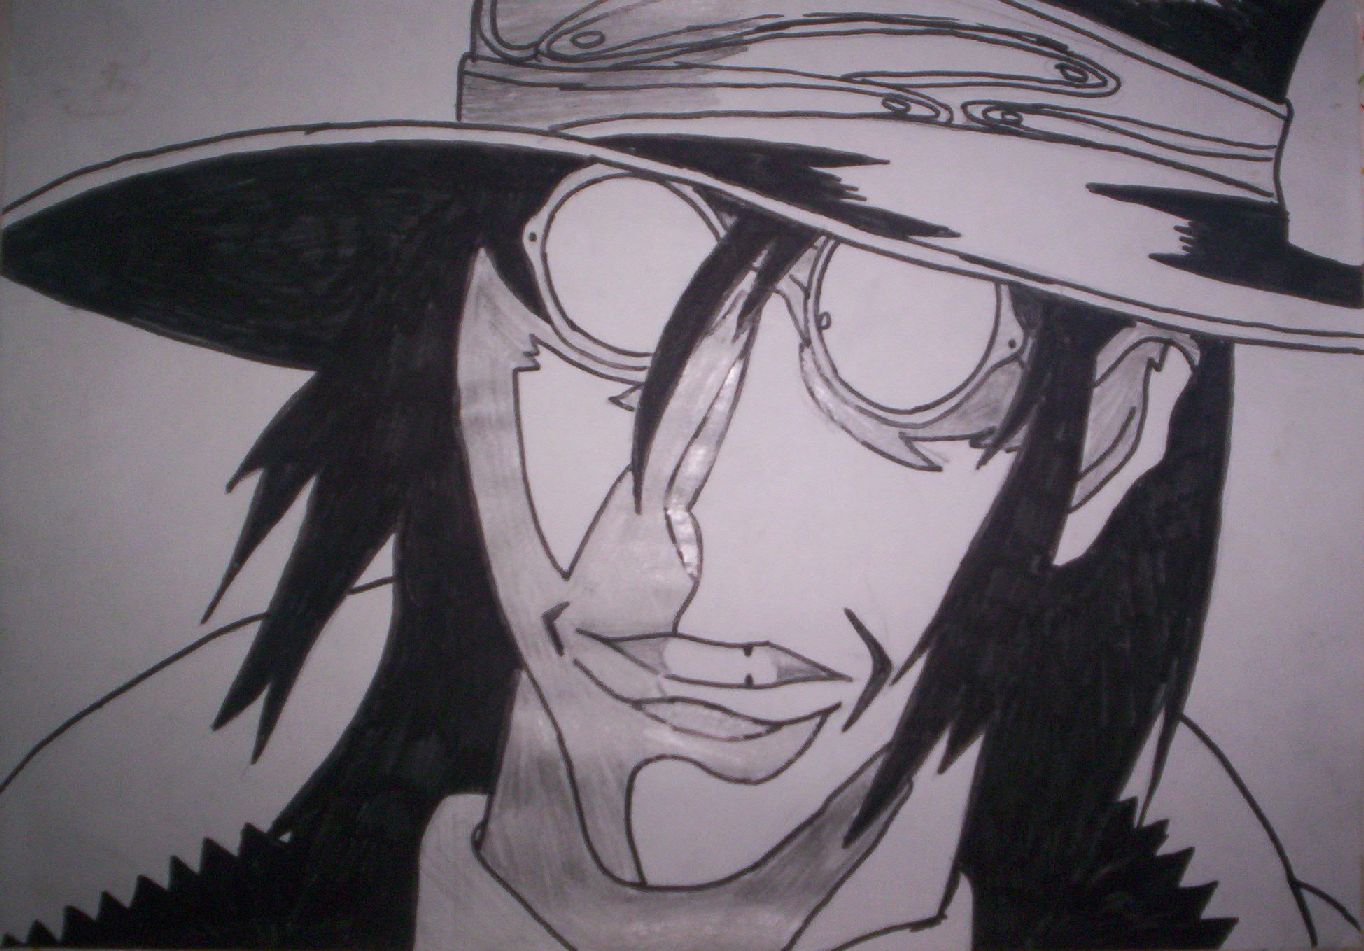 Alucard smiling by spike_speigal23